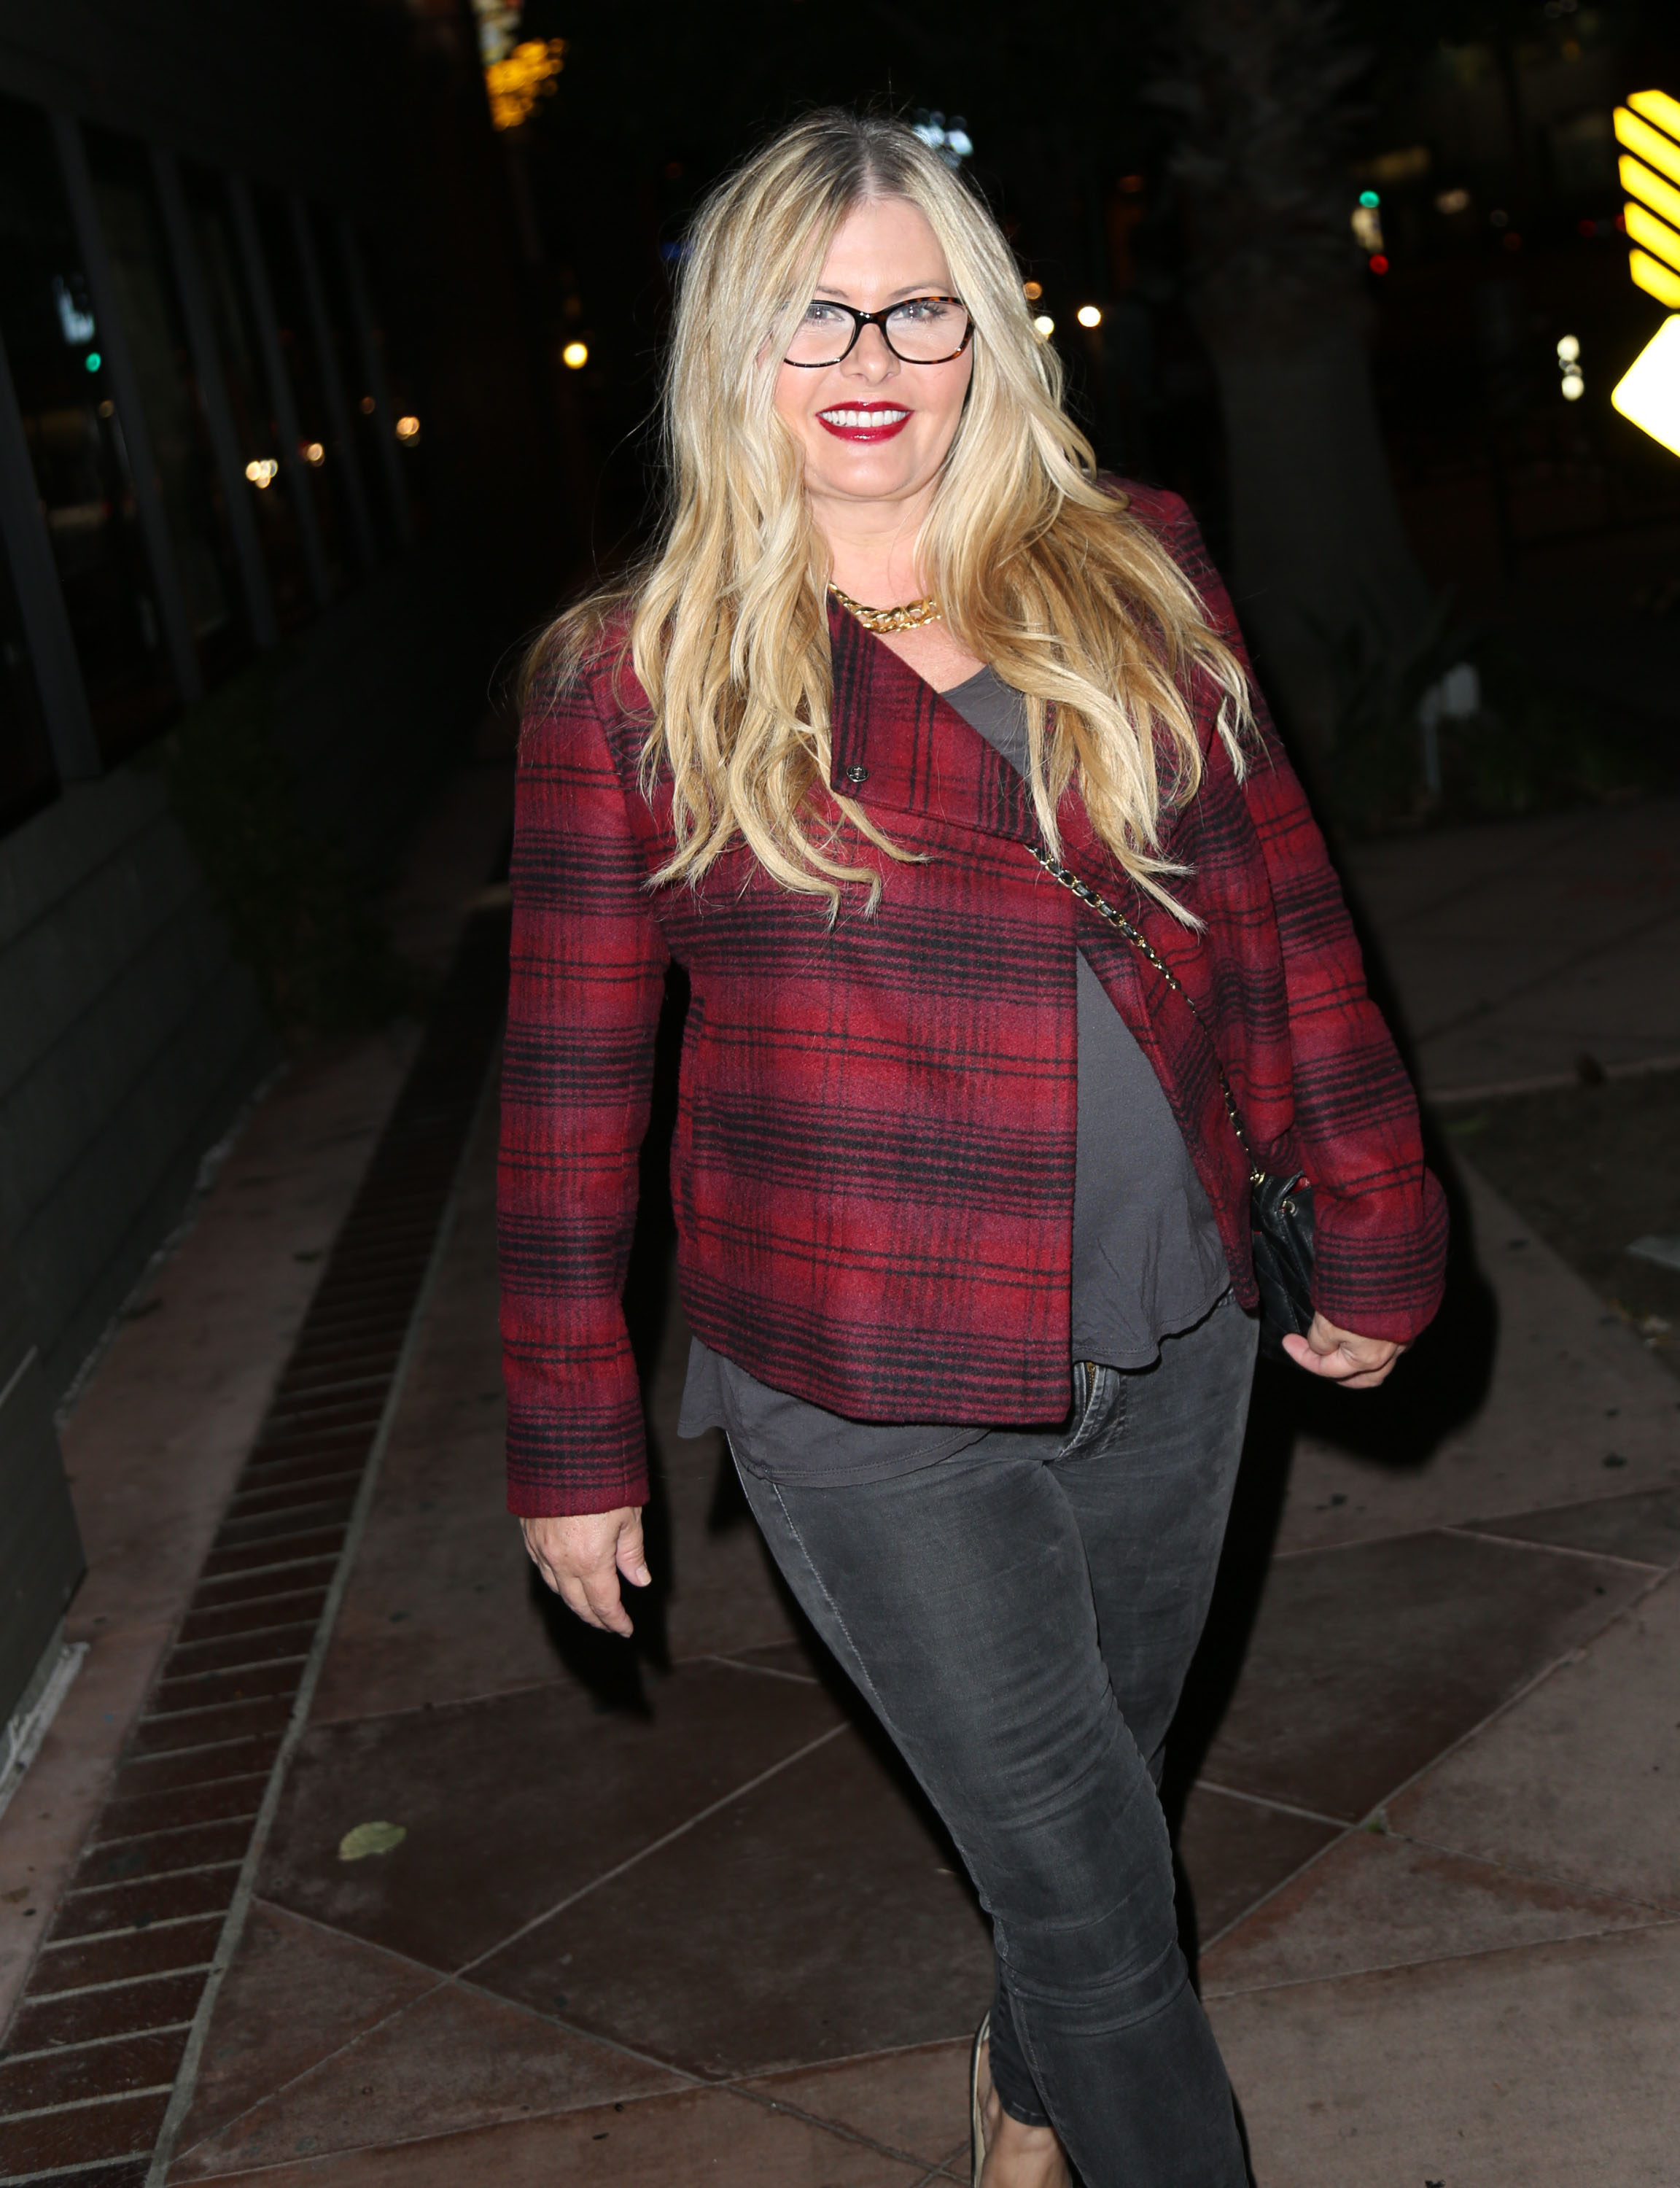 Nicole Eggert on March 22, 2016 in Los Angeles, California. | Source: Getty Images